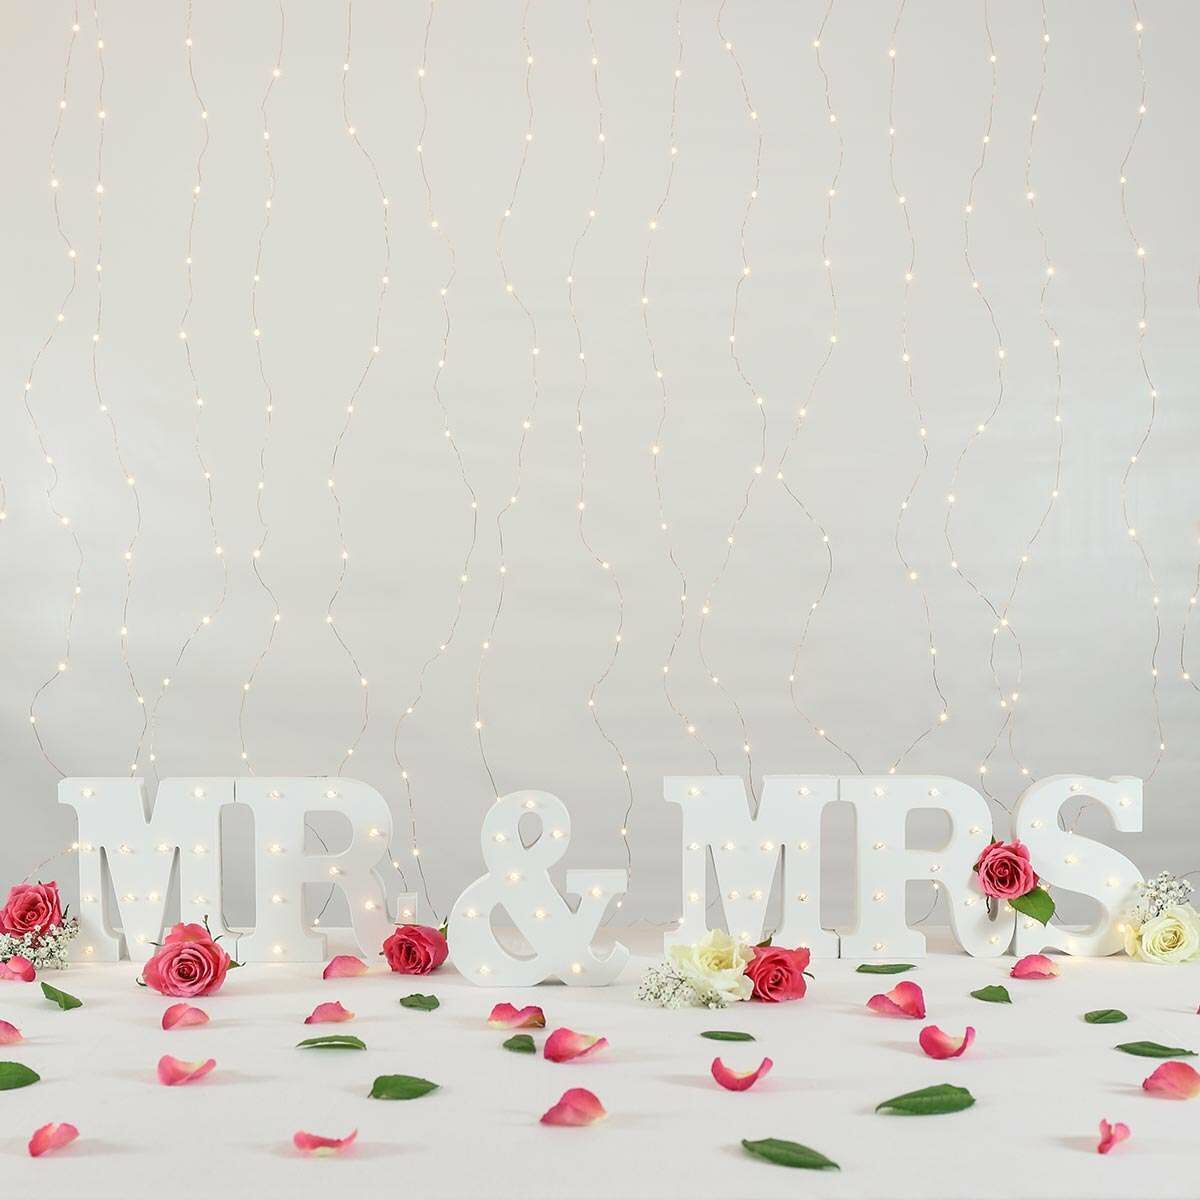 Mr & Mrs Battery Light Up Circus Letters, Warm White LEDs image 4